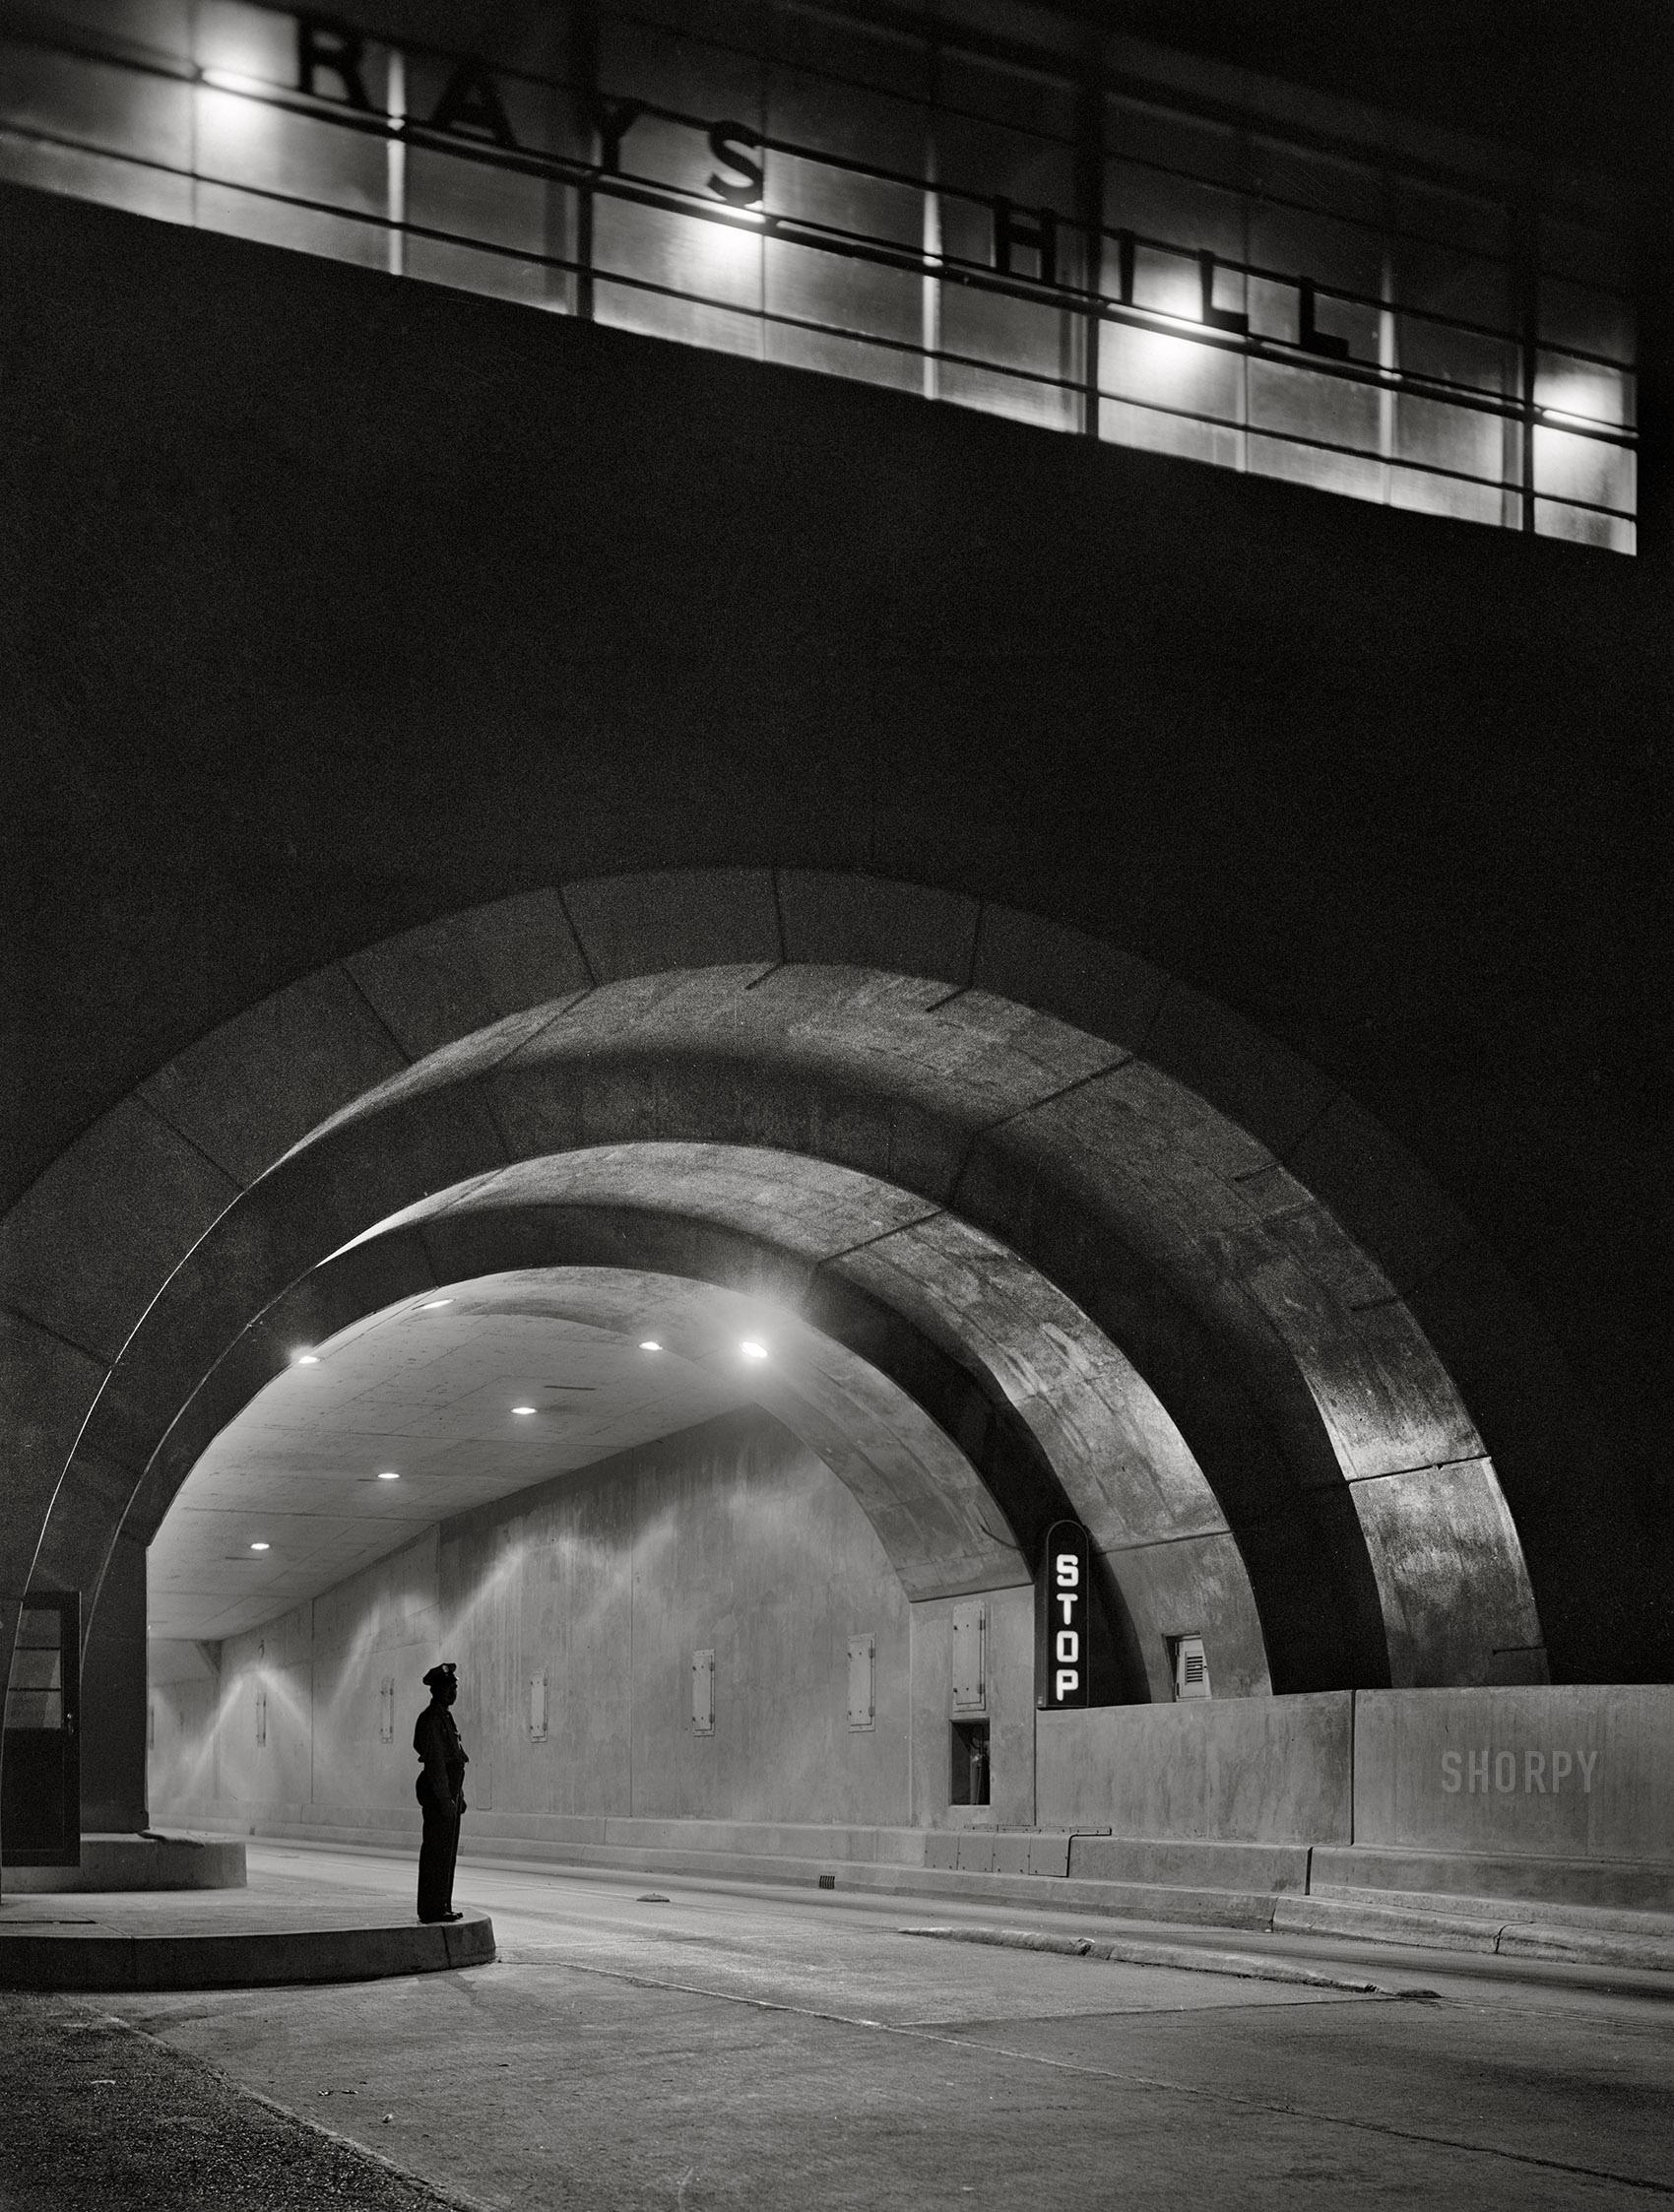 July 1942. "Pennsylvania Turnpike, Pennsylvania. Rays Hill Tunnel." Abandoned in 1968. Acetate negative by Arthur Rothstein for the Office of War Information. View full size.